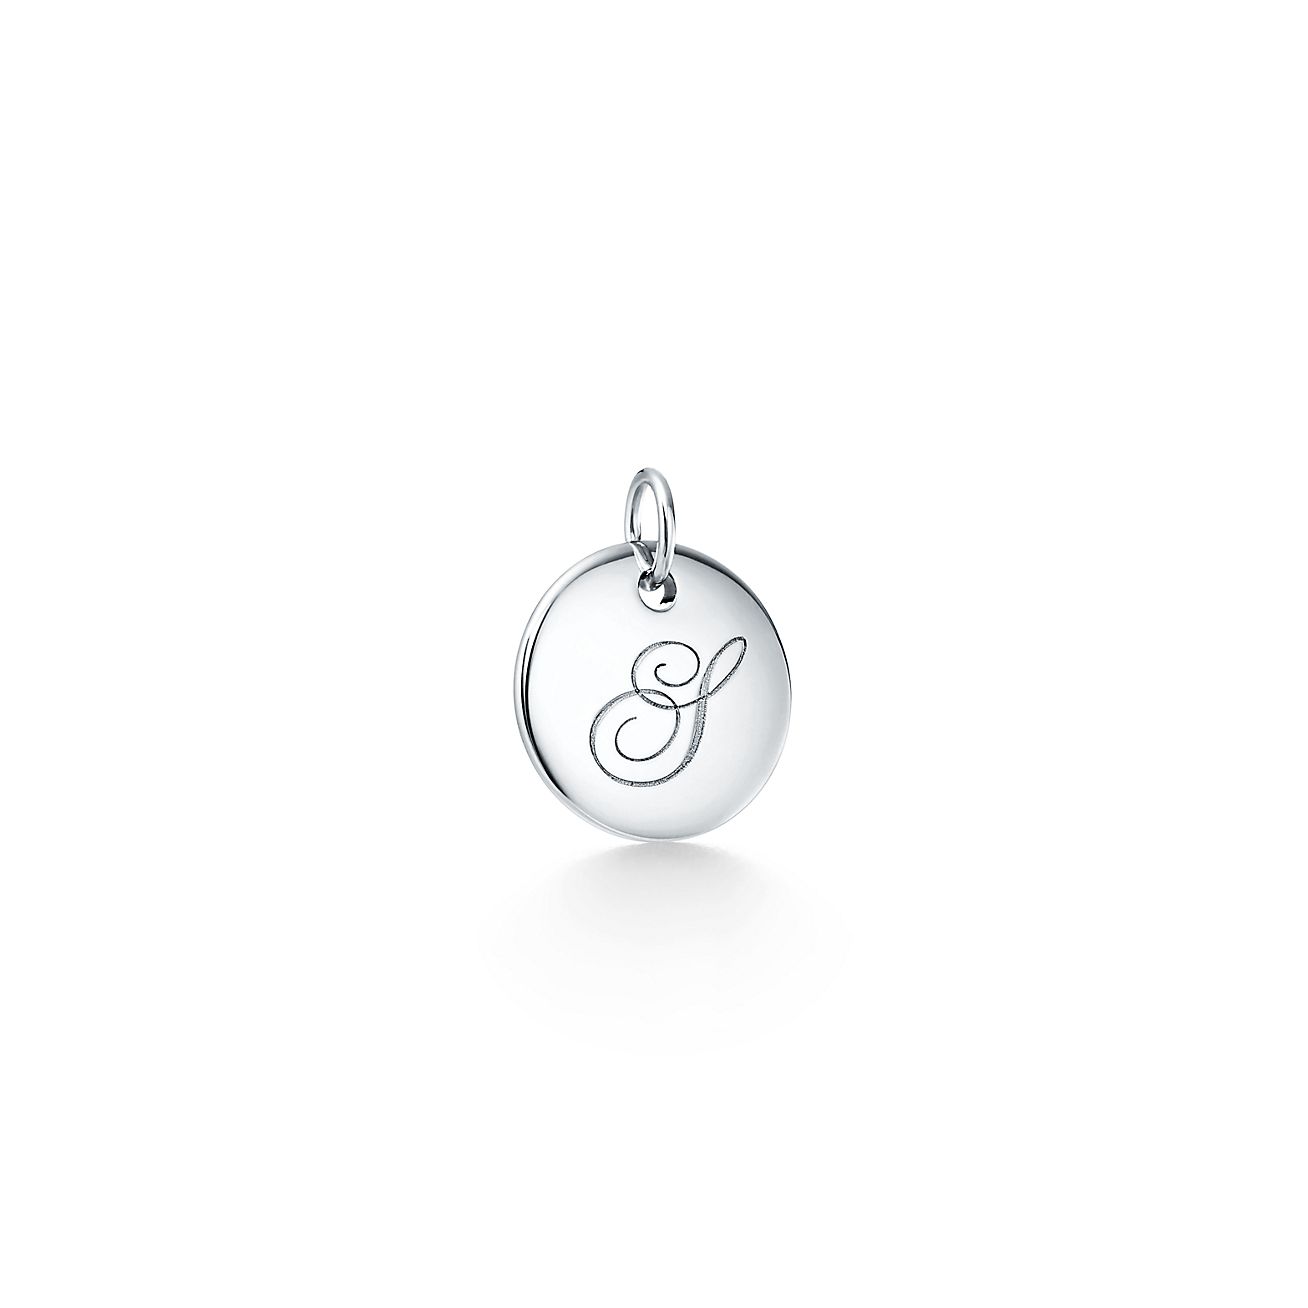 Tiffany Notes S Disc Charm in Silver, A 